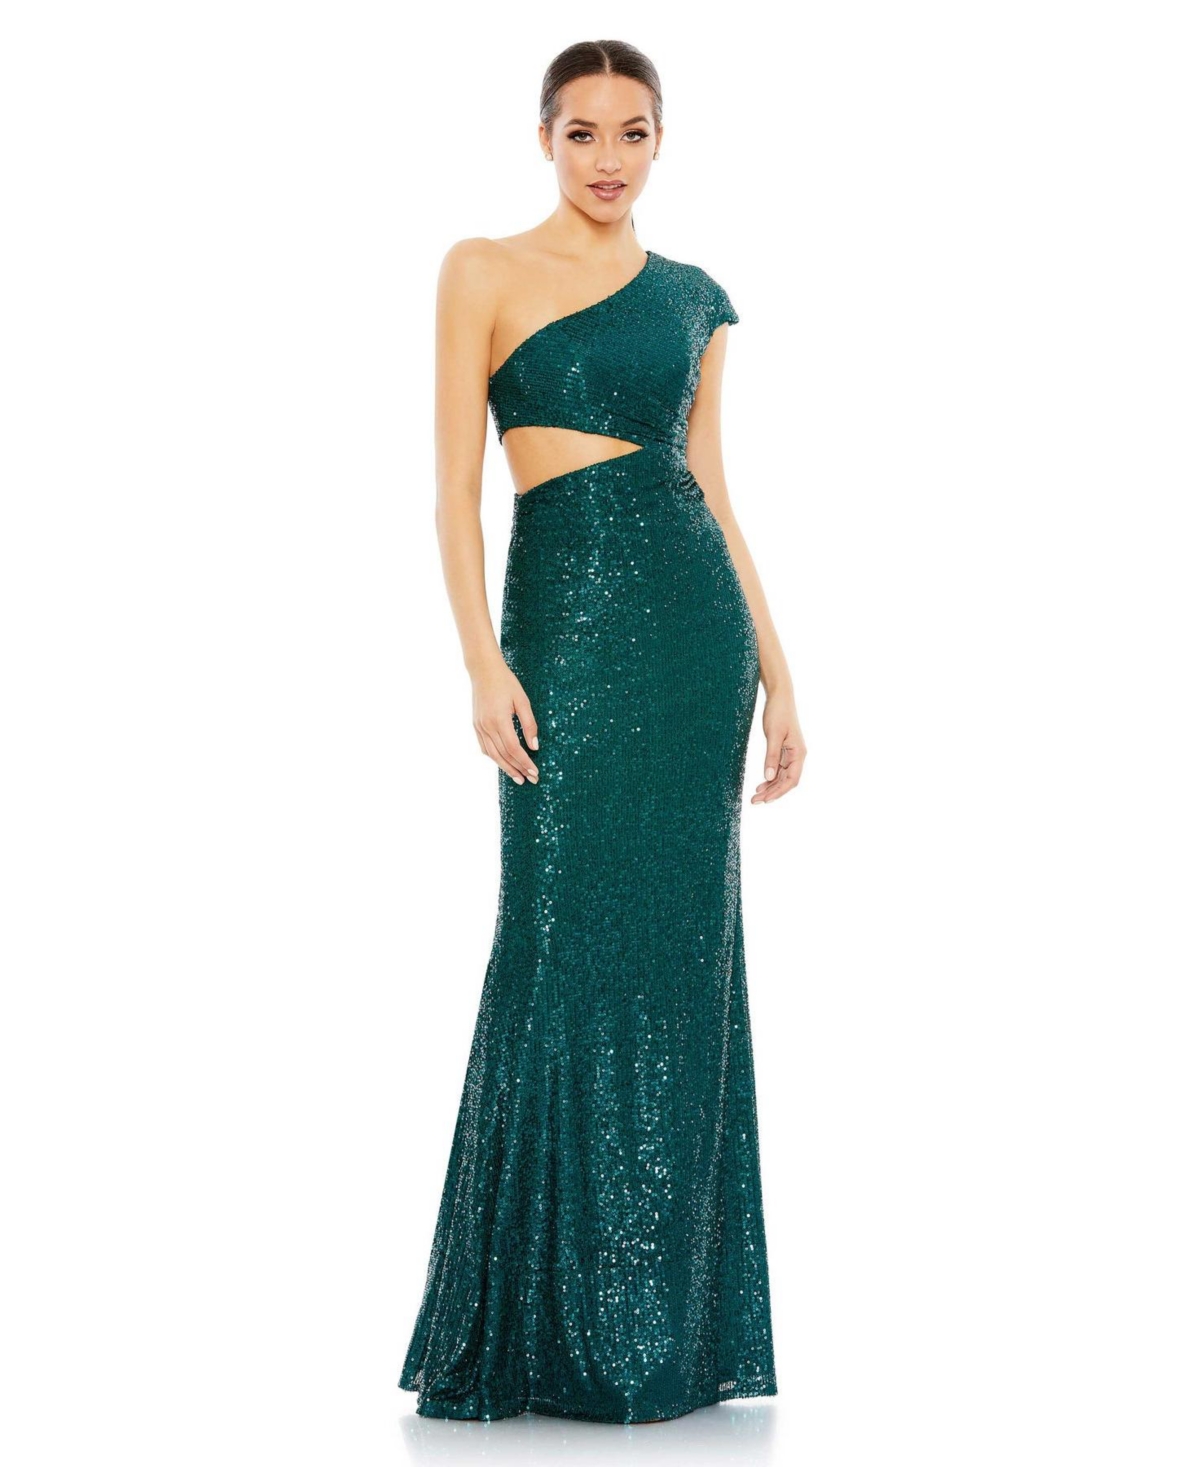 Women's Ieena Sequined One Shoulder Cap Sleeve Cut Out Gown - Teal